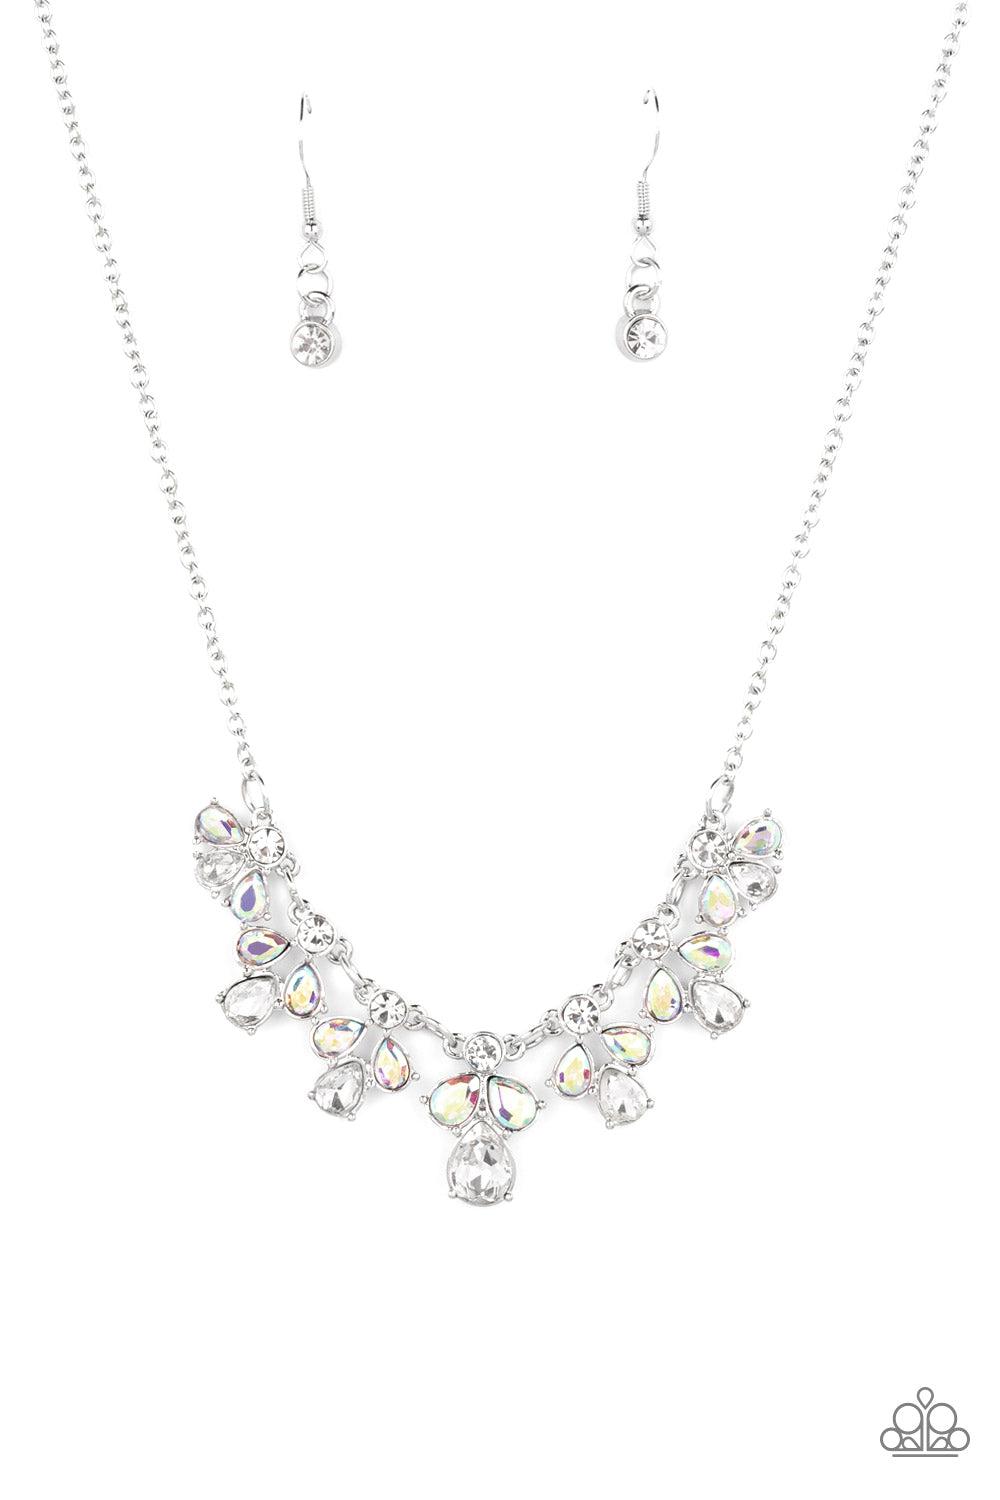 See in a New STARLIGHT White Iridescent Rhinestone Necklace - Paparazzi Accessories- lightbox - CarasShop.com - $5 Jewelry by Cara Jewels